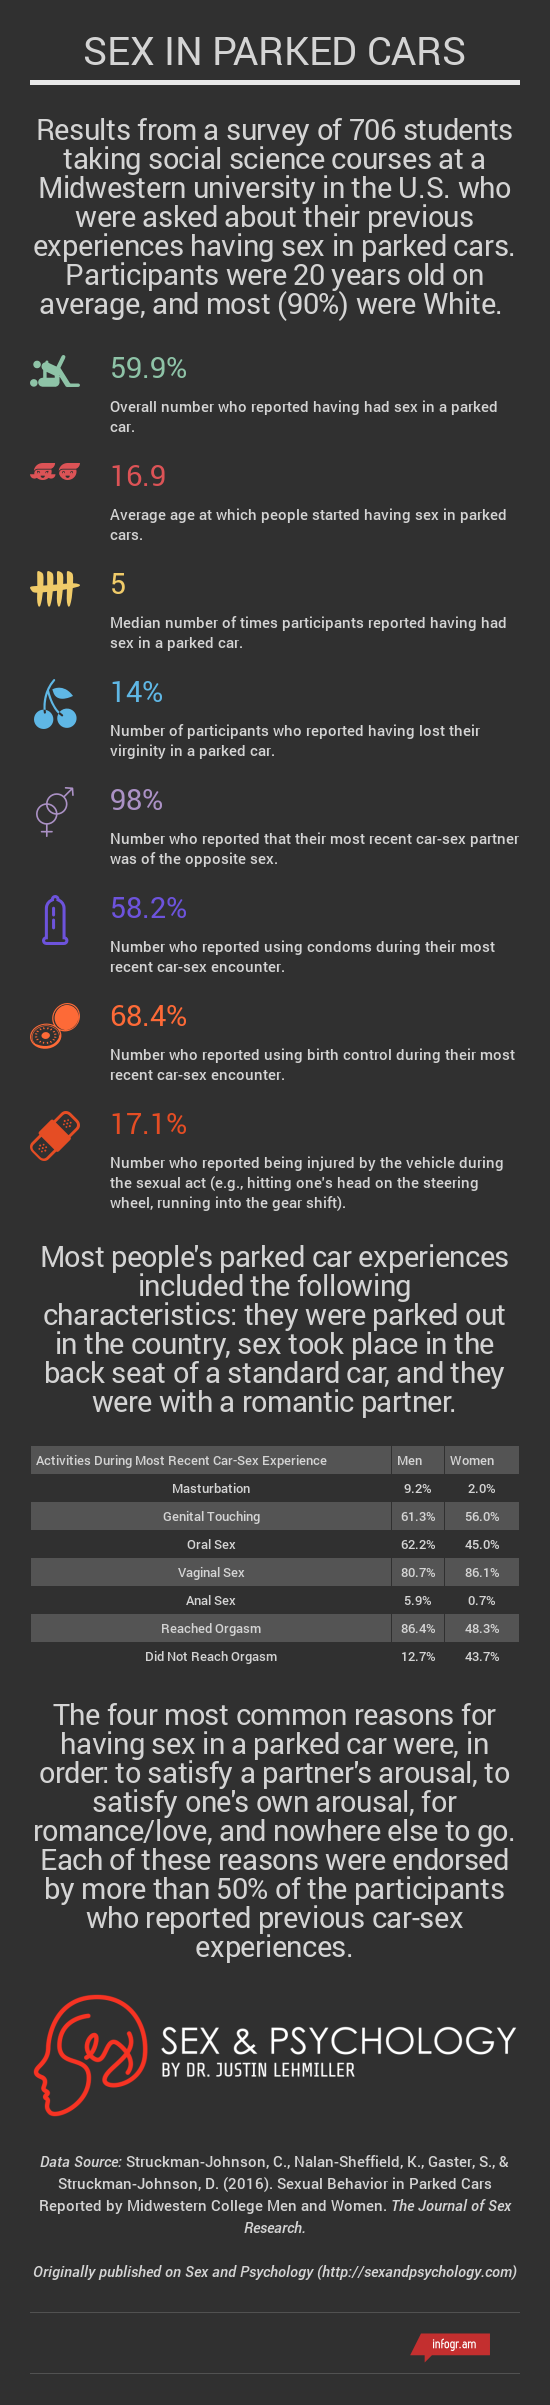 sex-in-parked-cars-infographic.png